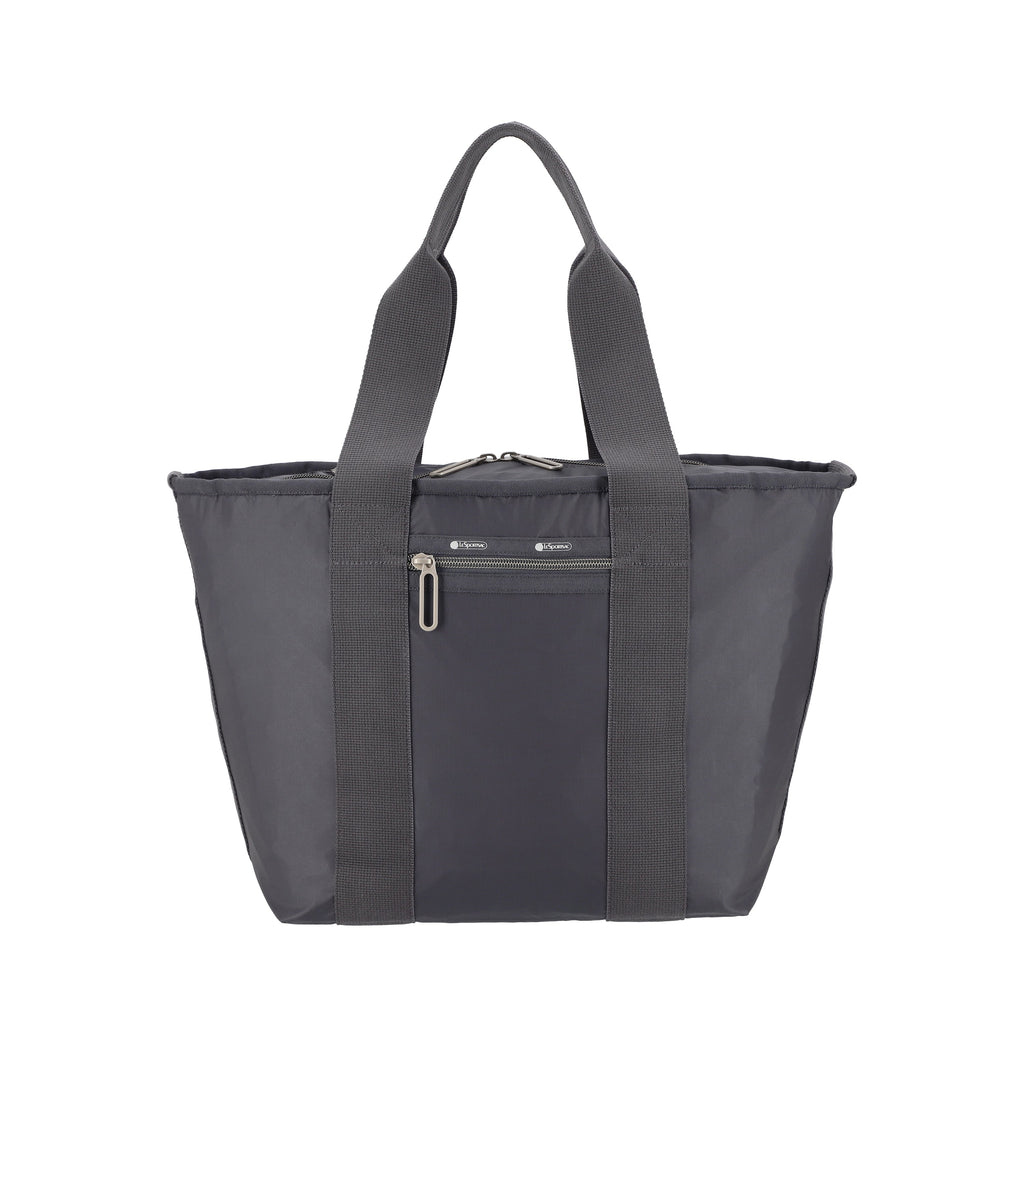 Essential East/West Tote - 24642704212016